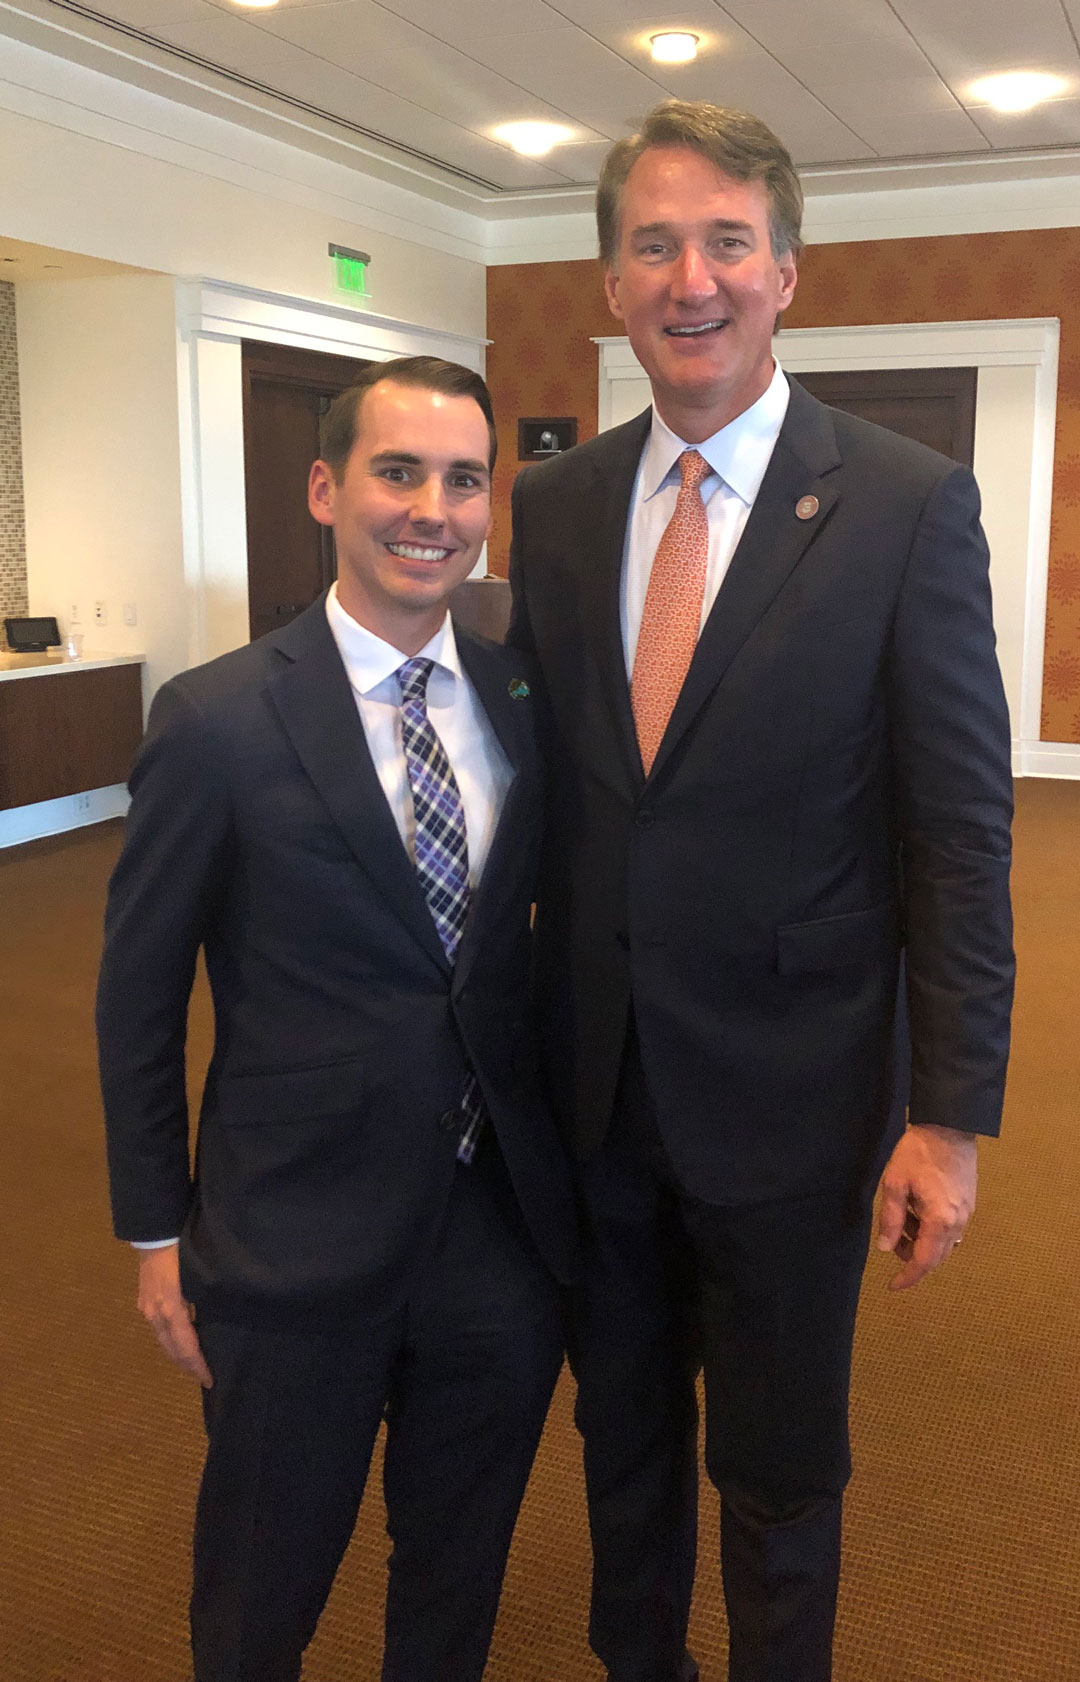 This afternoon, the League's JT Blau (left) met with Gov. Glenn Youngkin at a lunch event. They discussed credit unions, the work they are doing, and ways they can expand services to their communities and their members.